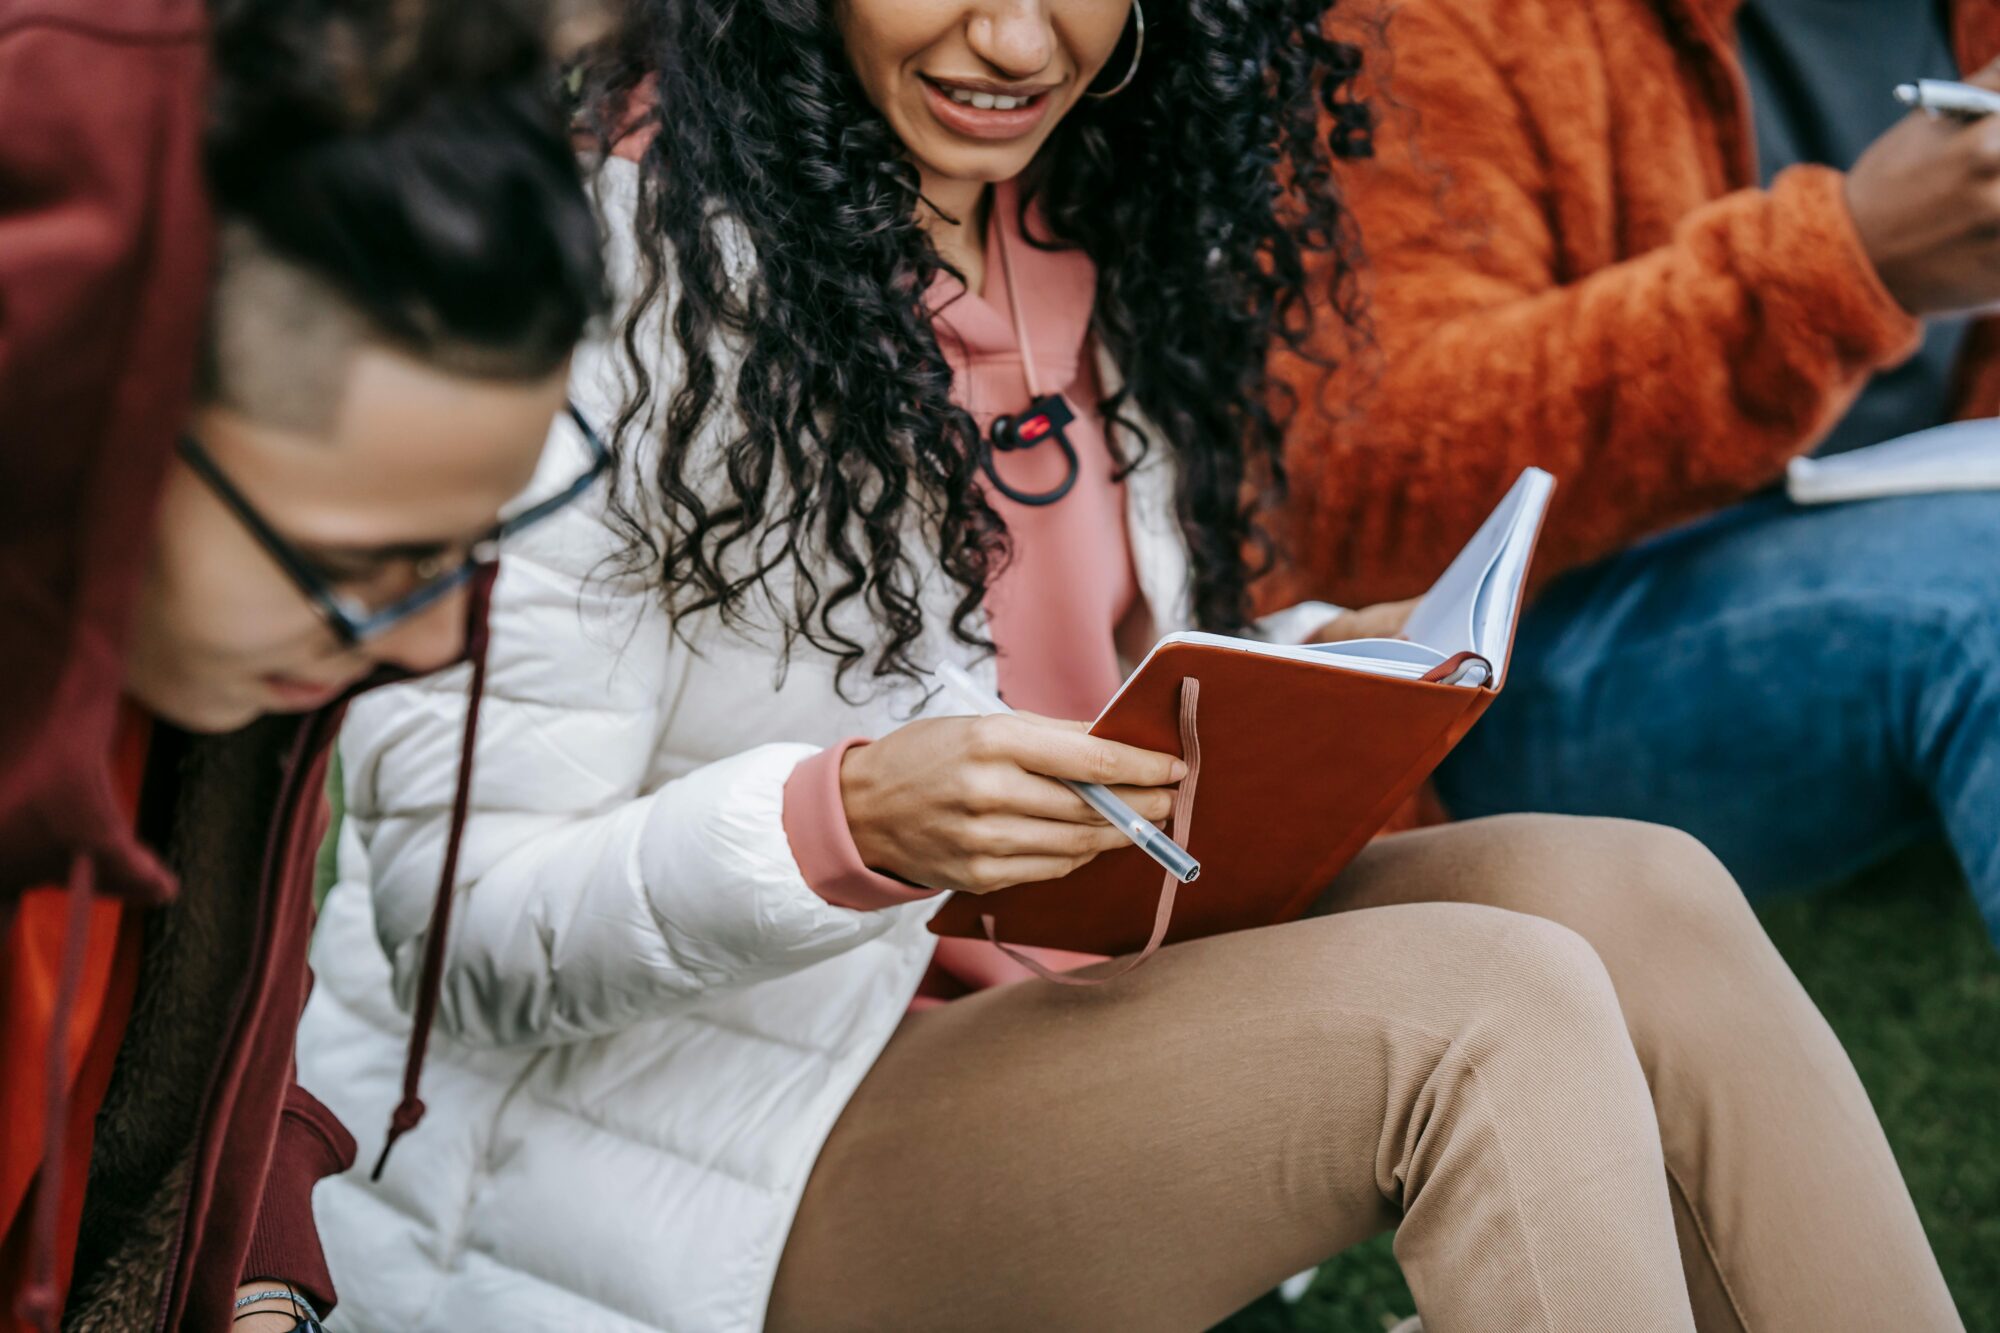 Crop of teenagers sitting outside, doing homework together. (Photo by Keira Burton from Pexels)